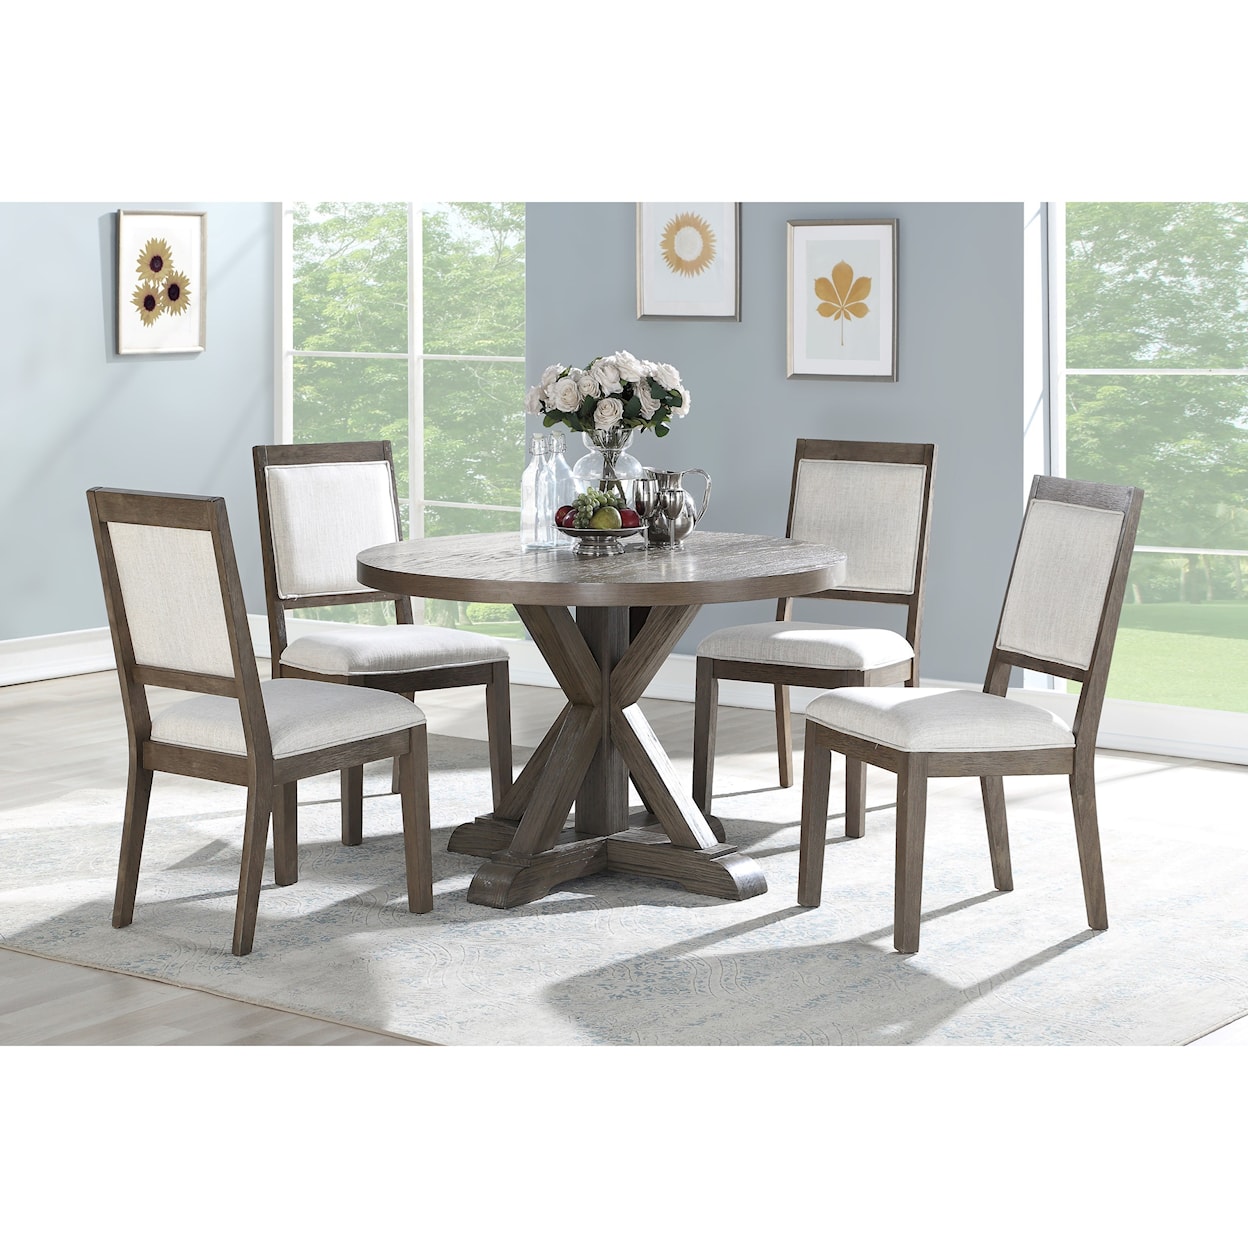 Steve Silver Wisteria Wisteria 5-Piece Table and Chair Set